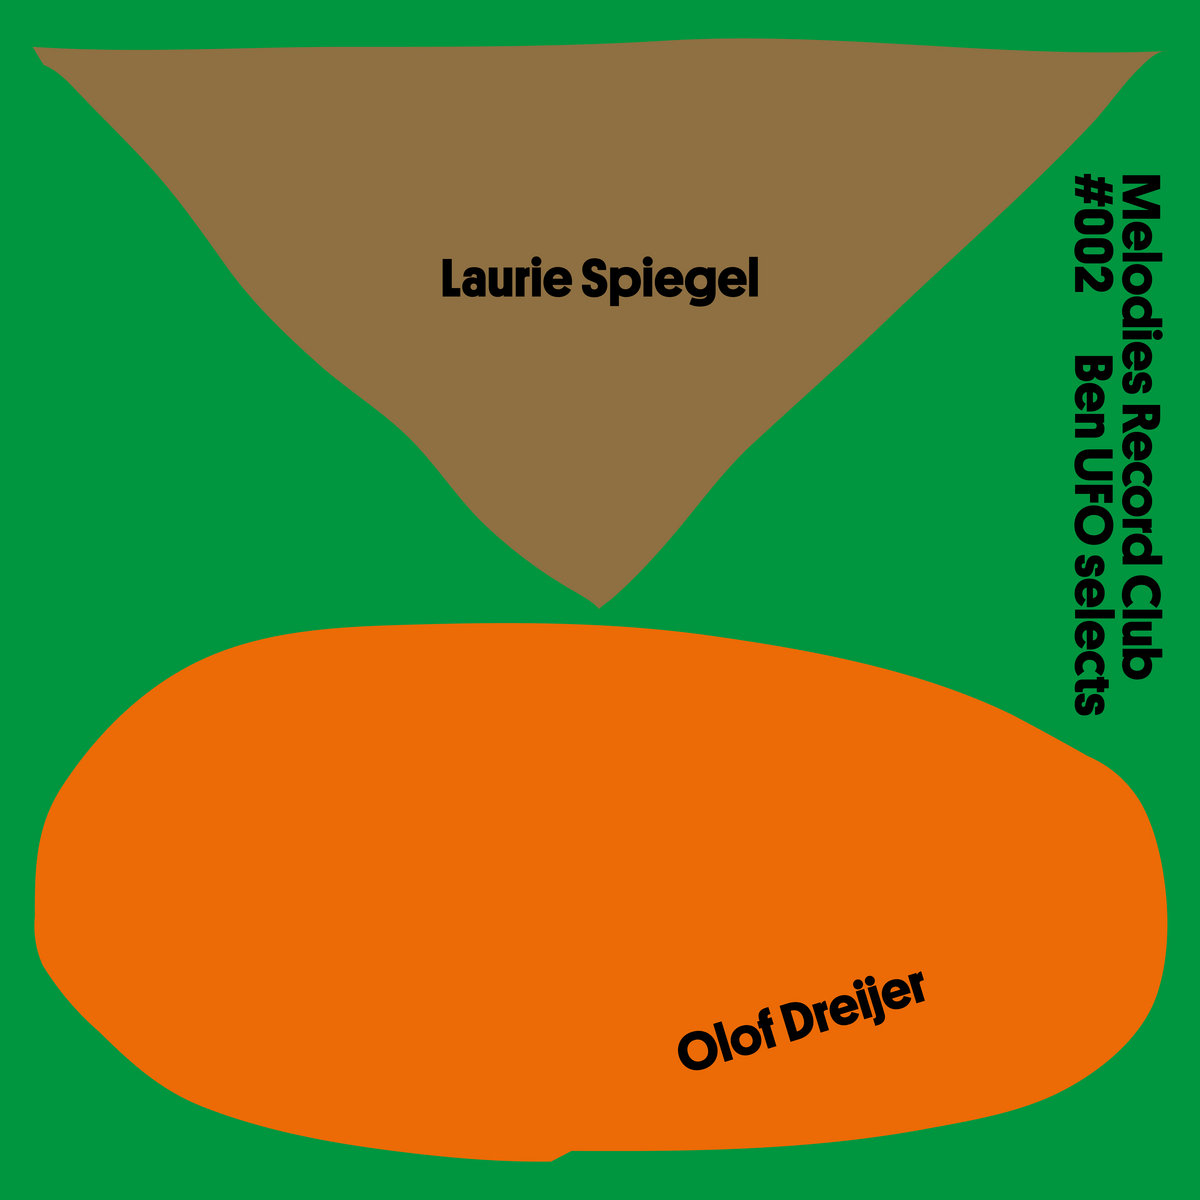 Laurie Spiegel / Olof Dreijer – Melodies Record Club 002: Ben UFO Selects